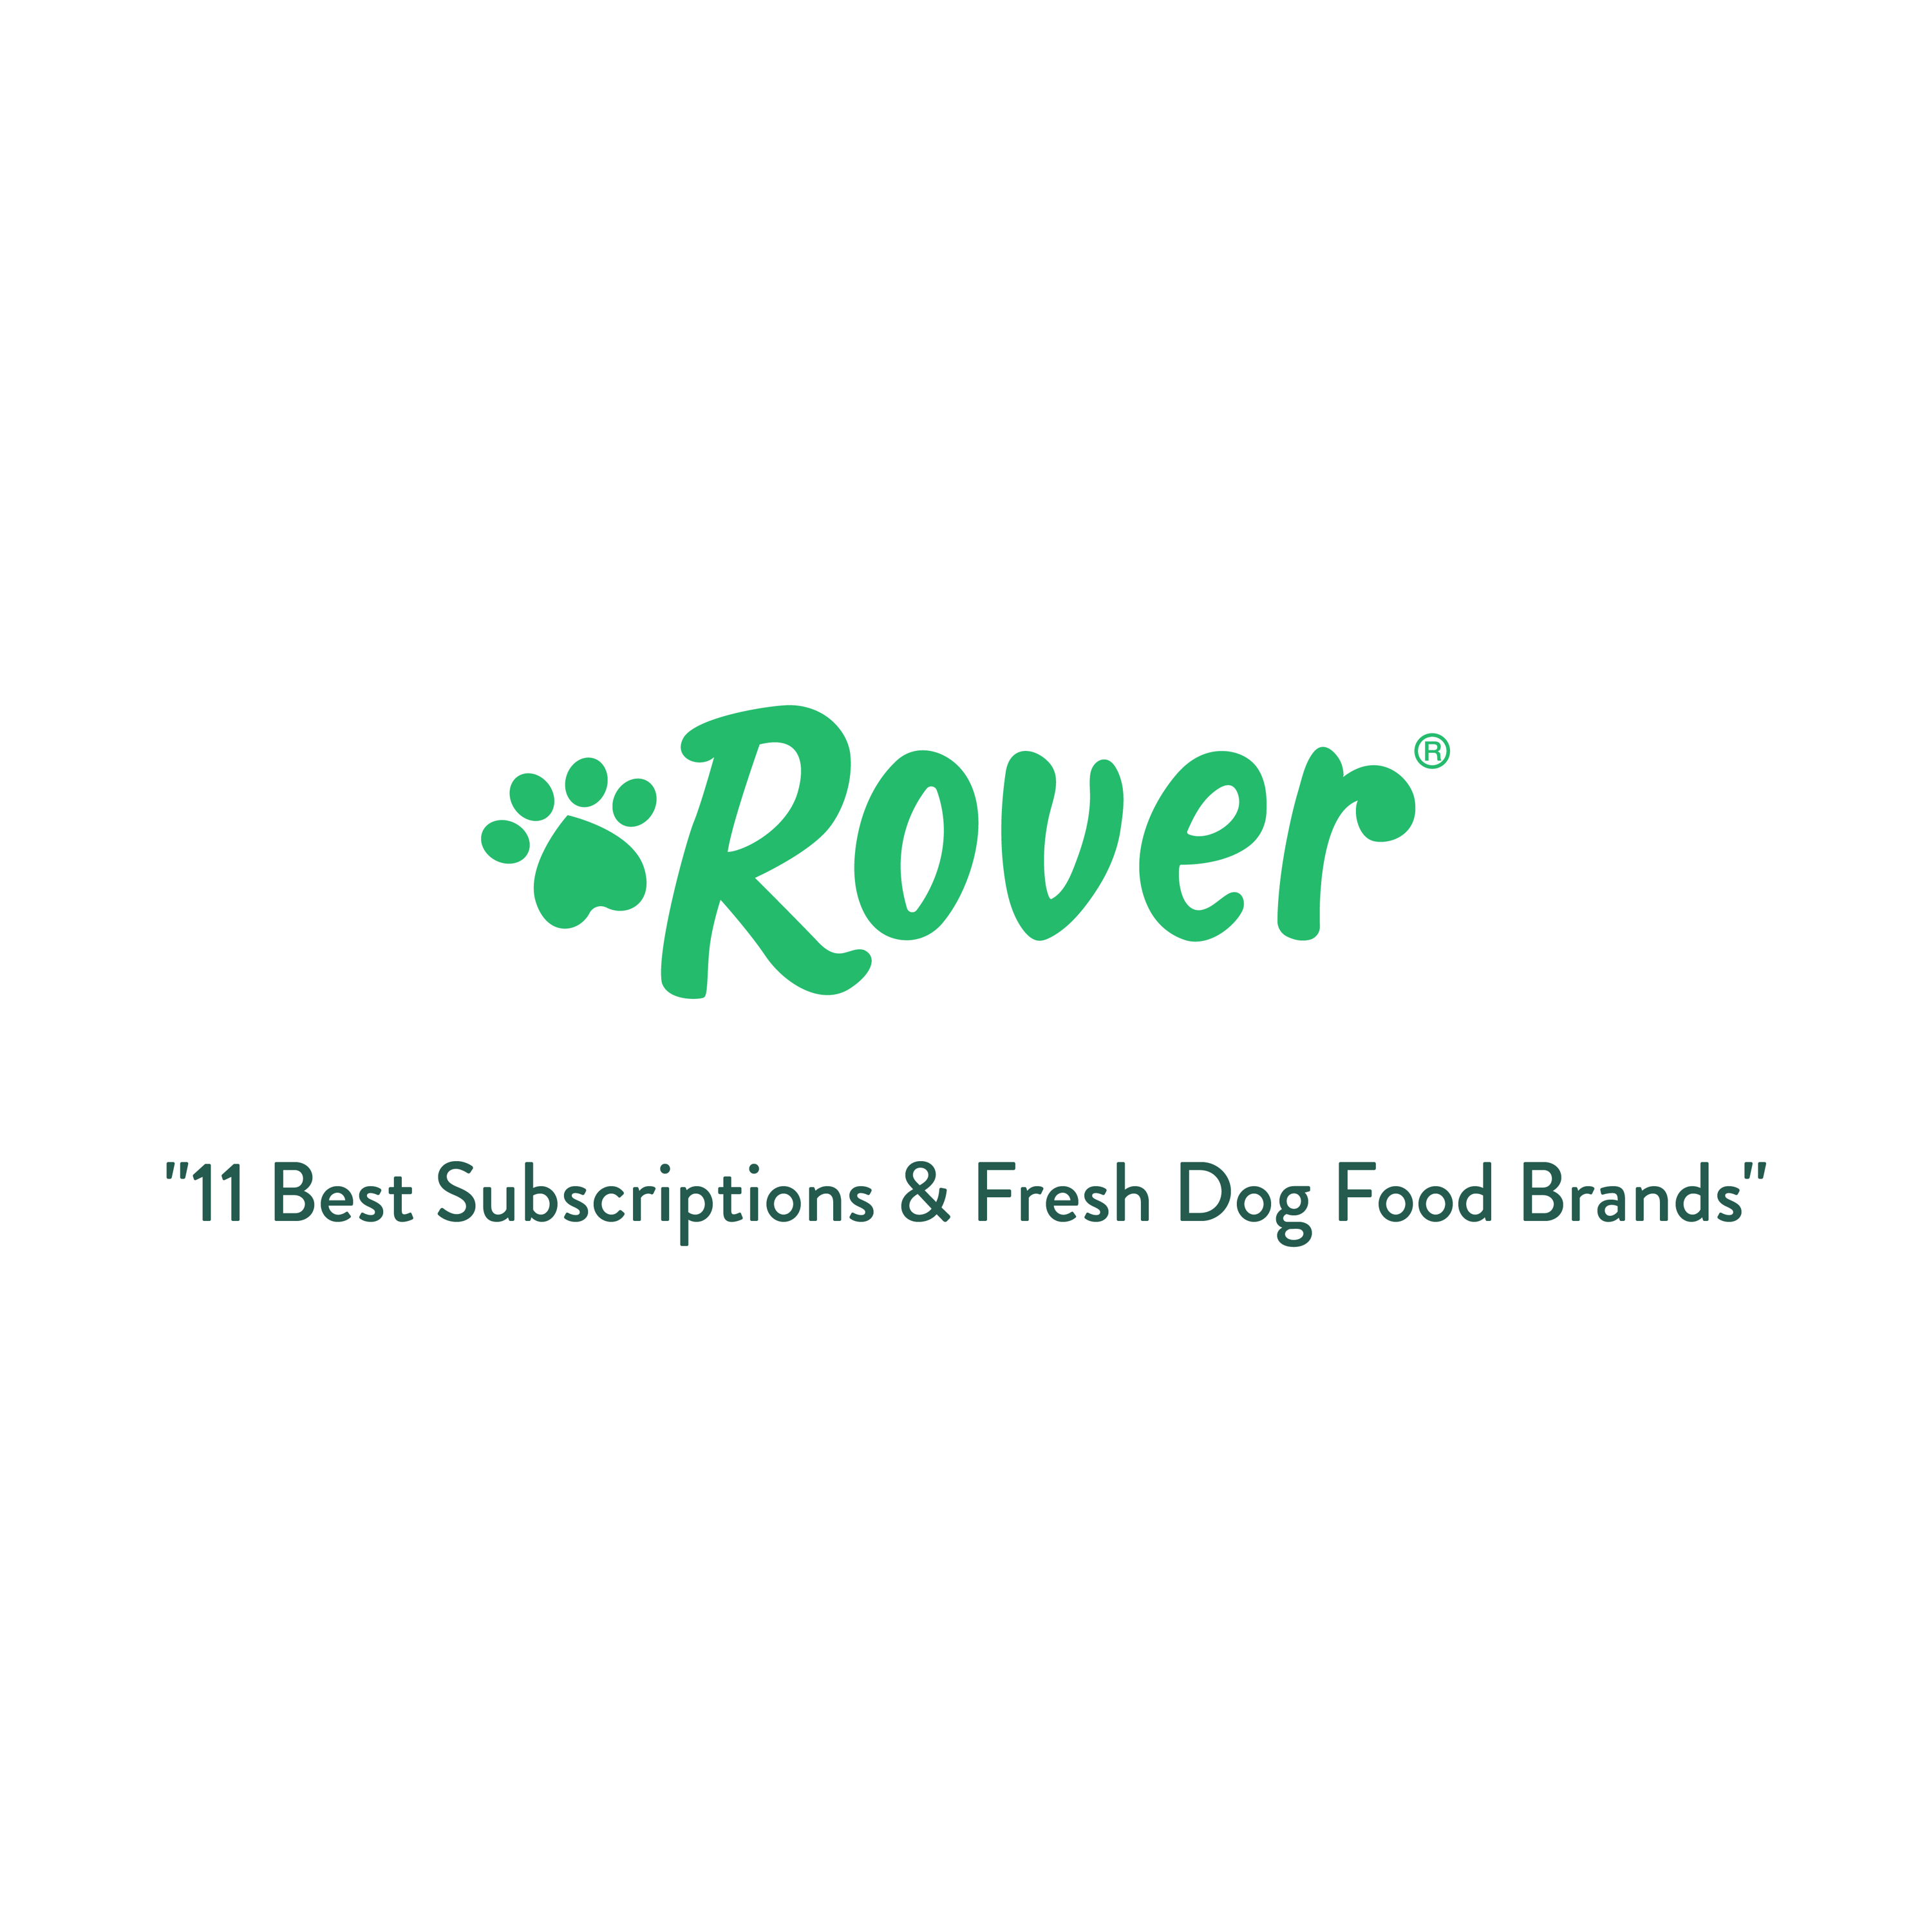 Ranked one of the best subscription fresh dog food brands by Rover.